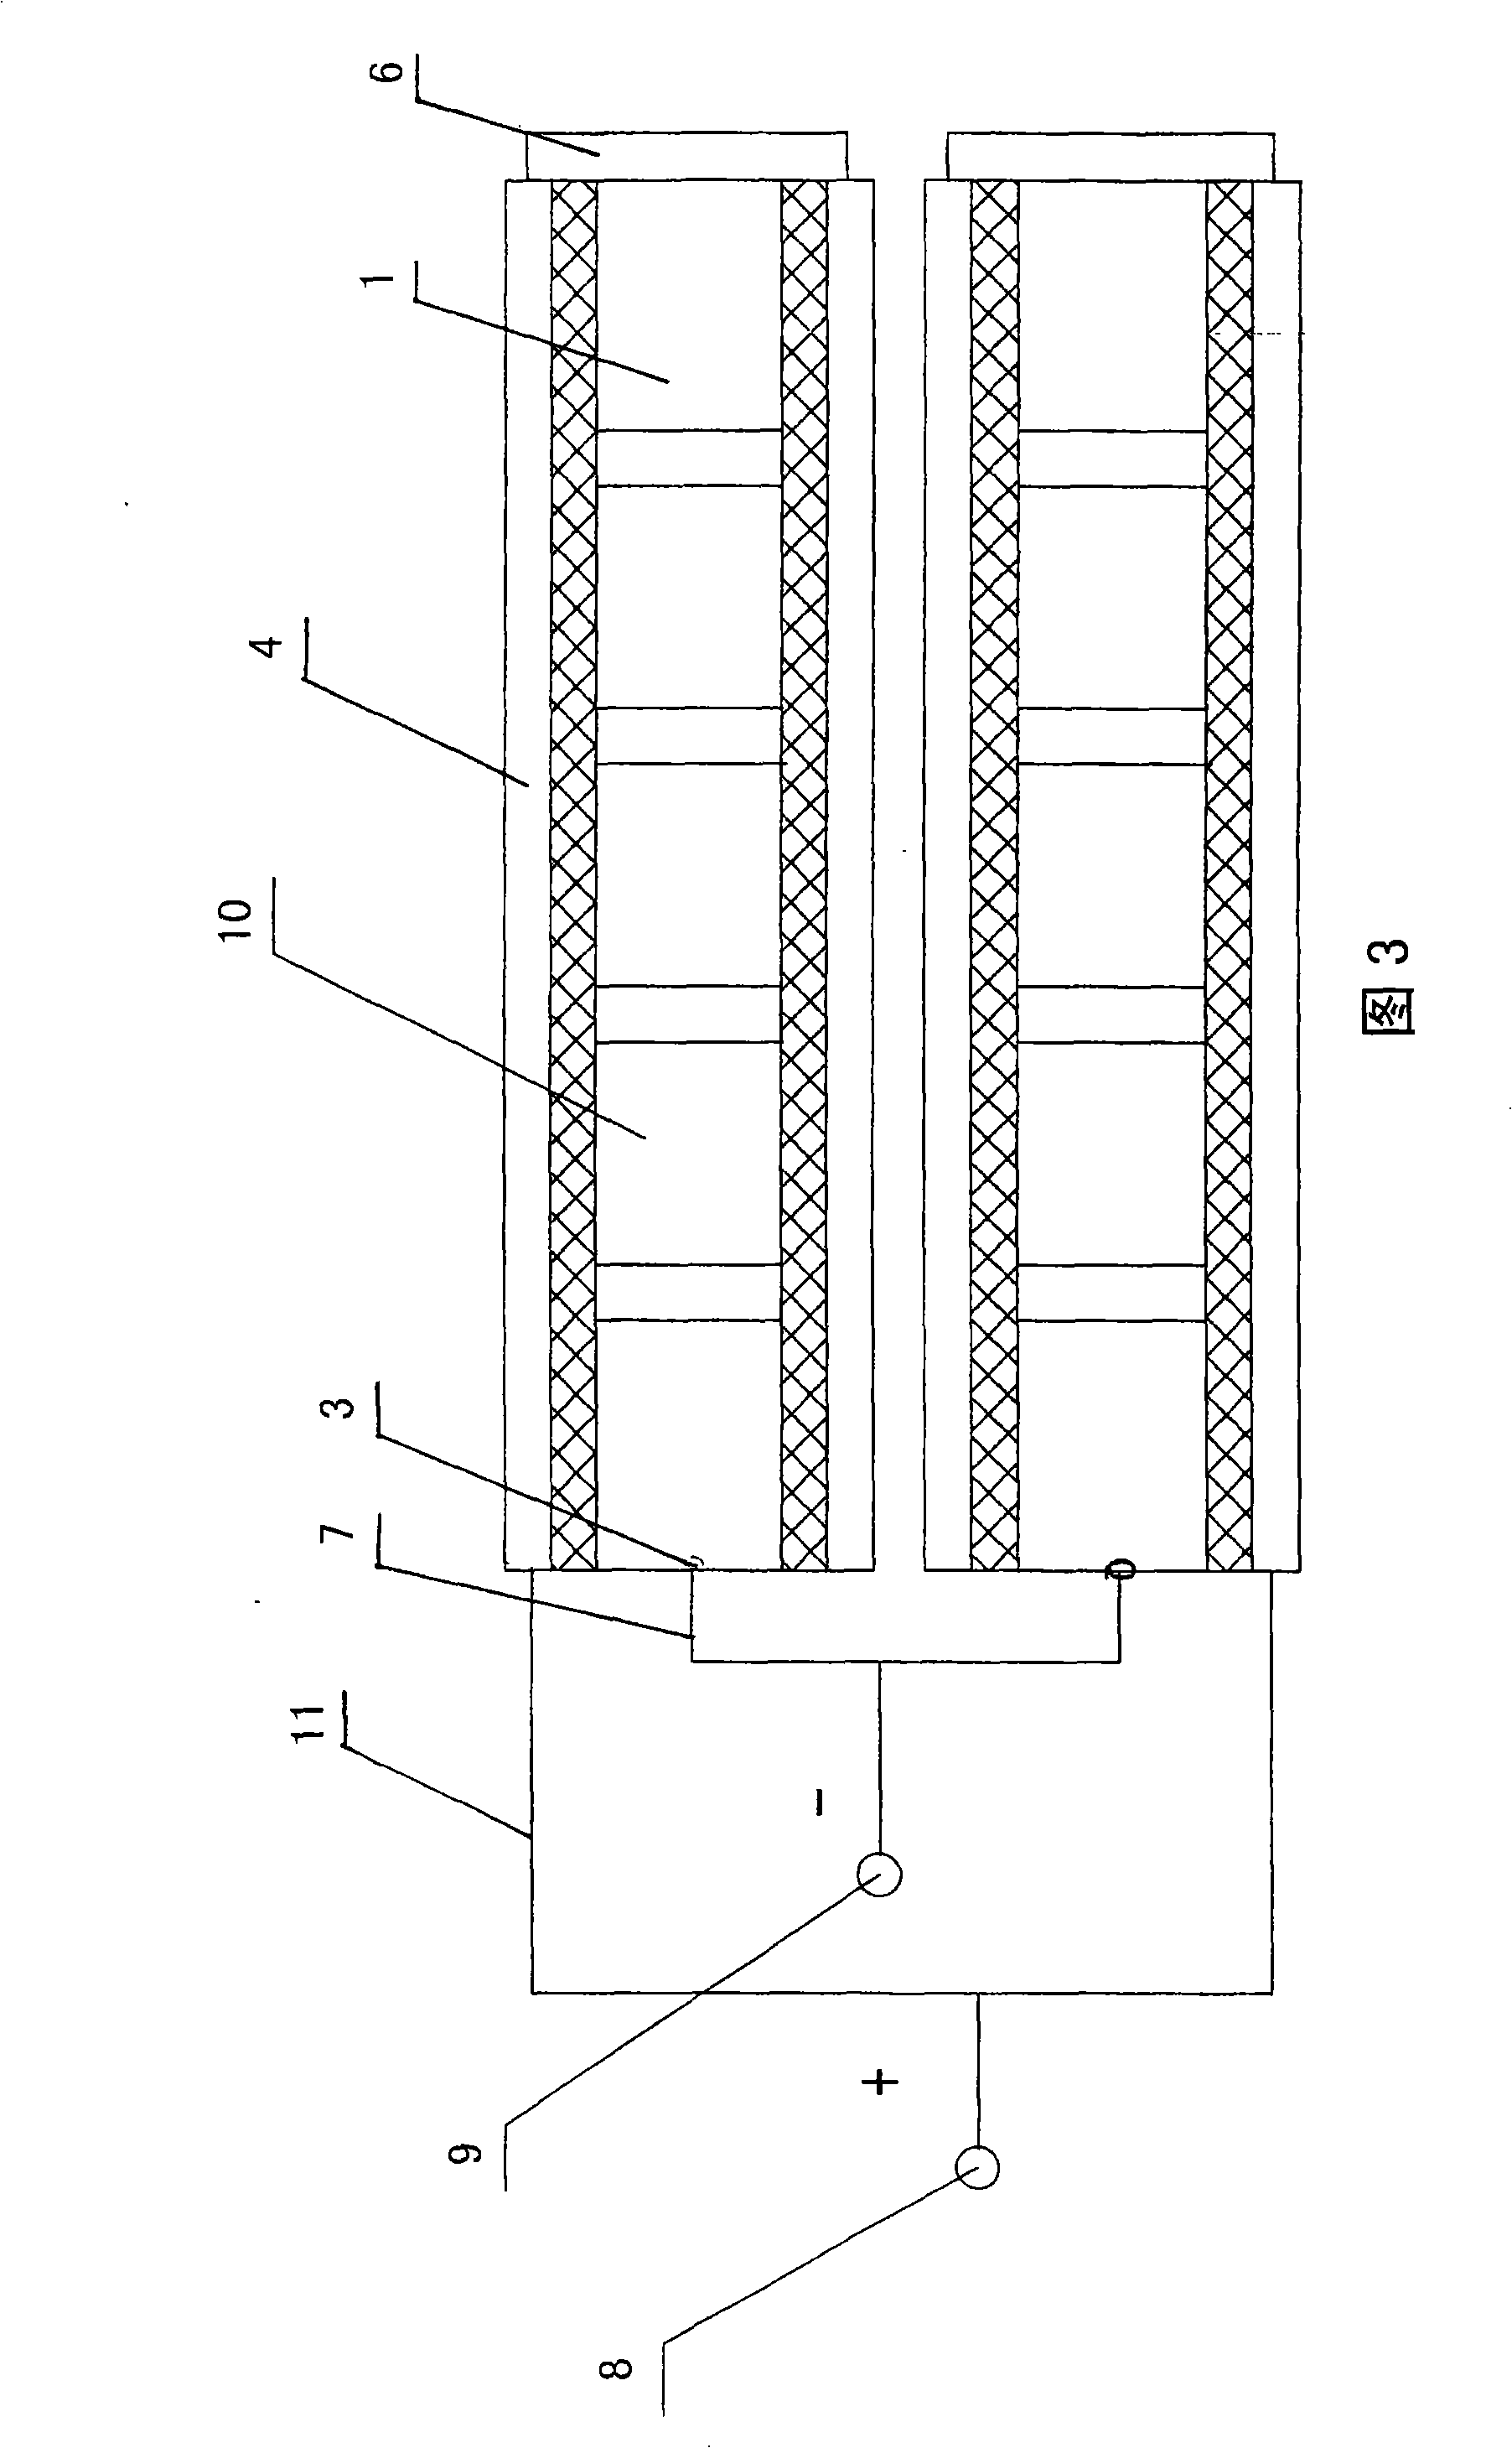 Equivalent sub-energy resource and production method